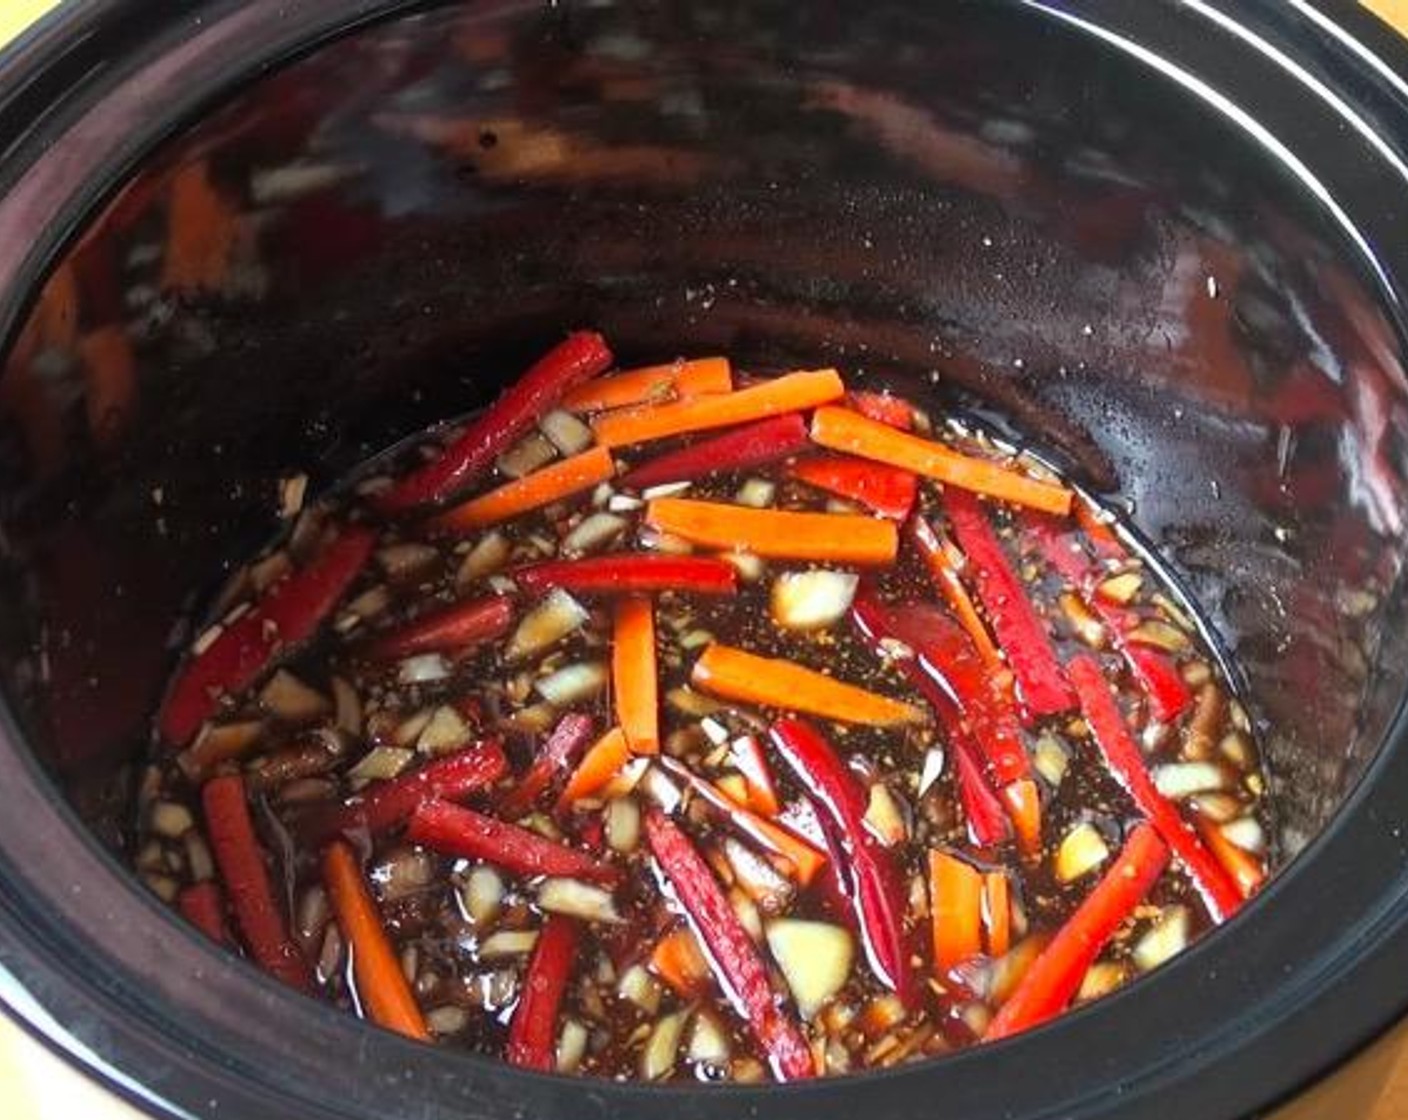 step 1 In a slow cooker, add Garlic (2 cloves), Fresh Ginger (1/2 Tbsp), Yellow Onion (1), Carrot (1), Red Bell Pepper (1), Brown Sugar (1 cup), Sweet Chili Sauce (1/4 cup), Dark Soy Sauce (1/2 cup) and Water (1 cup). Stir together. Put the lid on and cook on high for 1 hour.